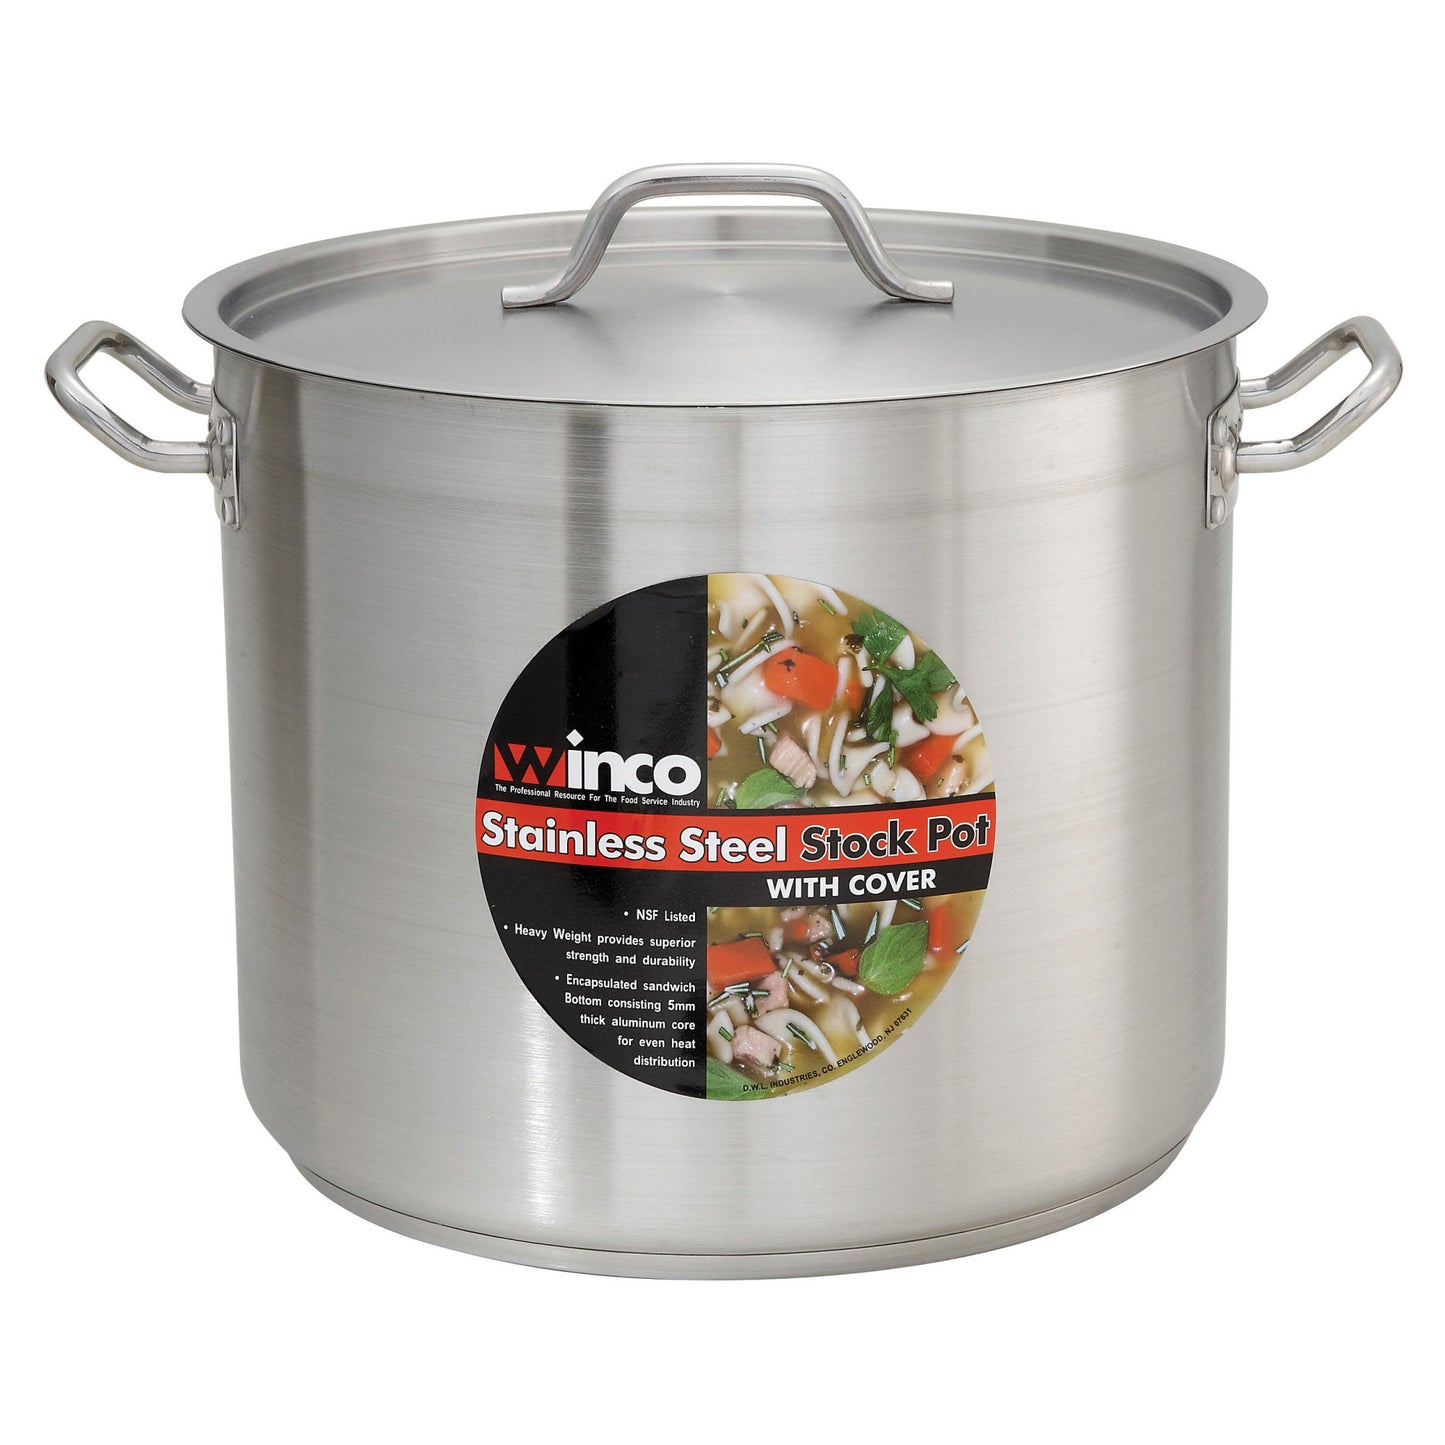 SST-60 - Stainless Steel Stock Pot with Cover - 60 Quart